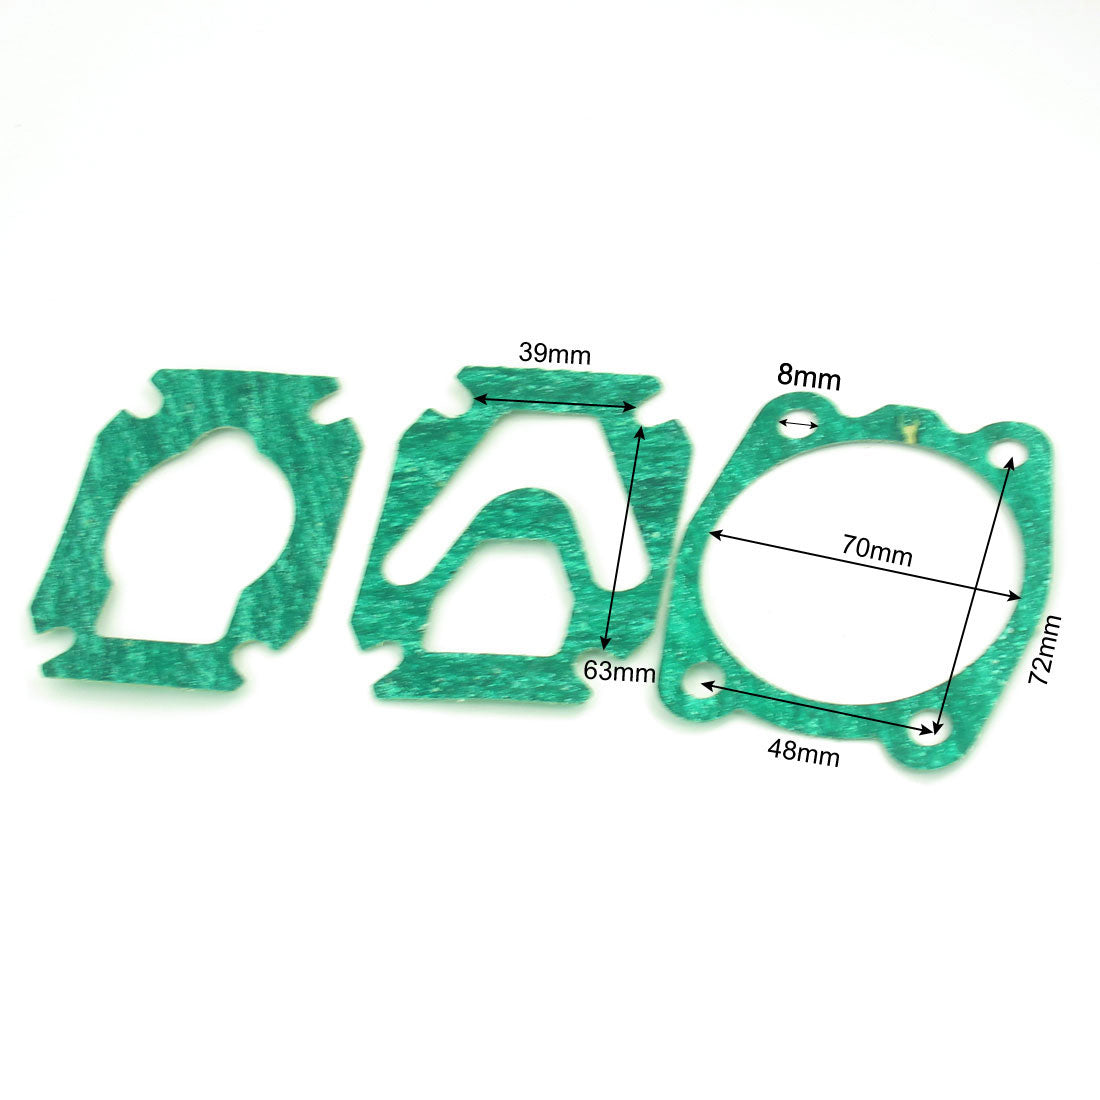 uxcell Uxcell 3 in 1 Air Compressor Cylinder Head Base Valve Plate Sealing Gasket